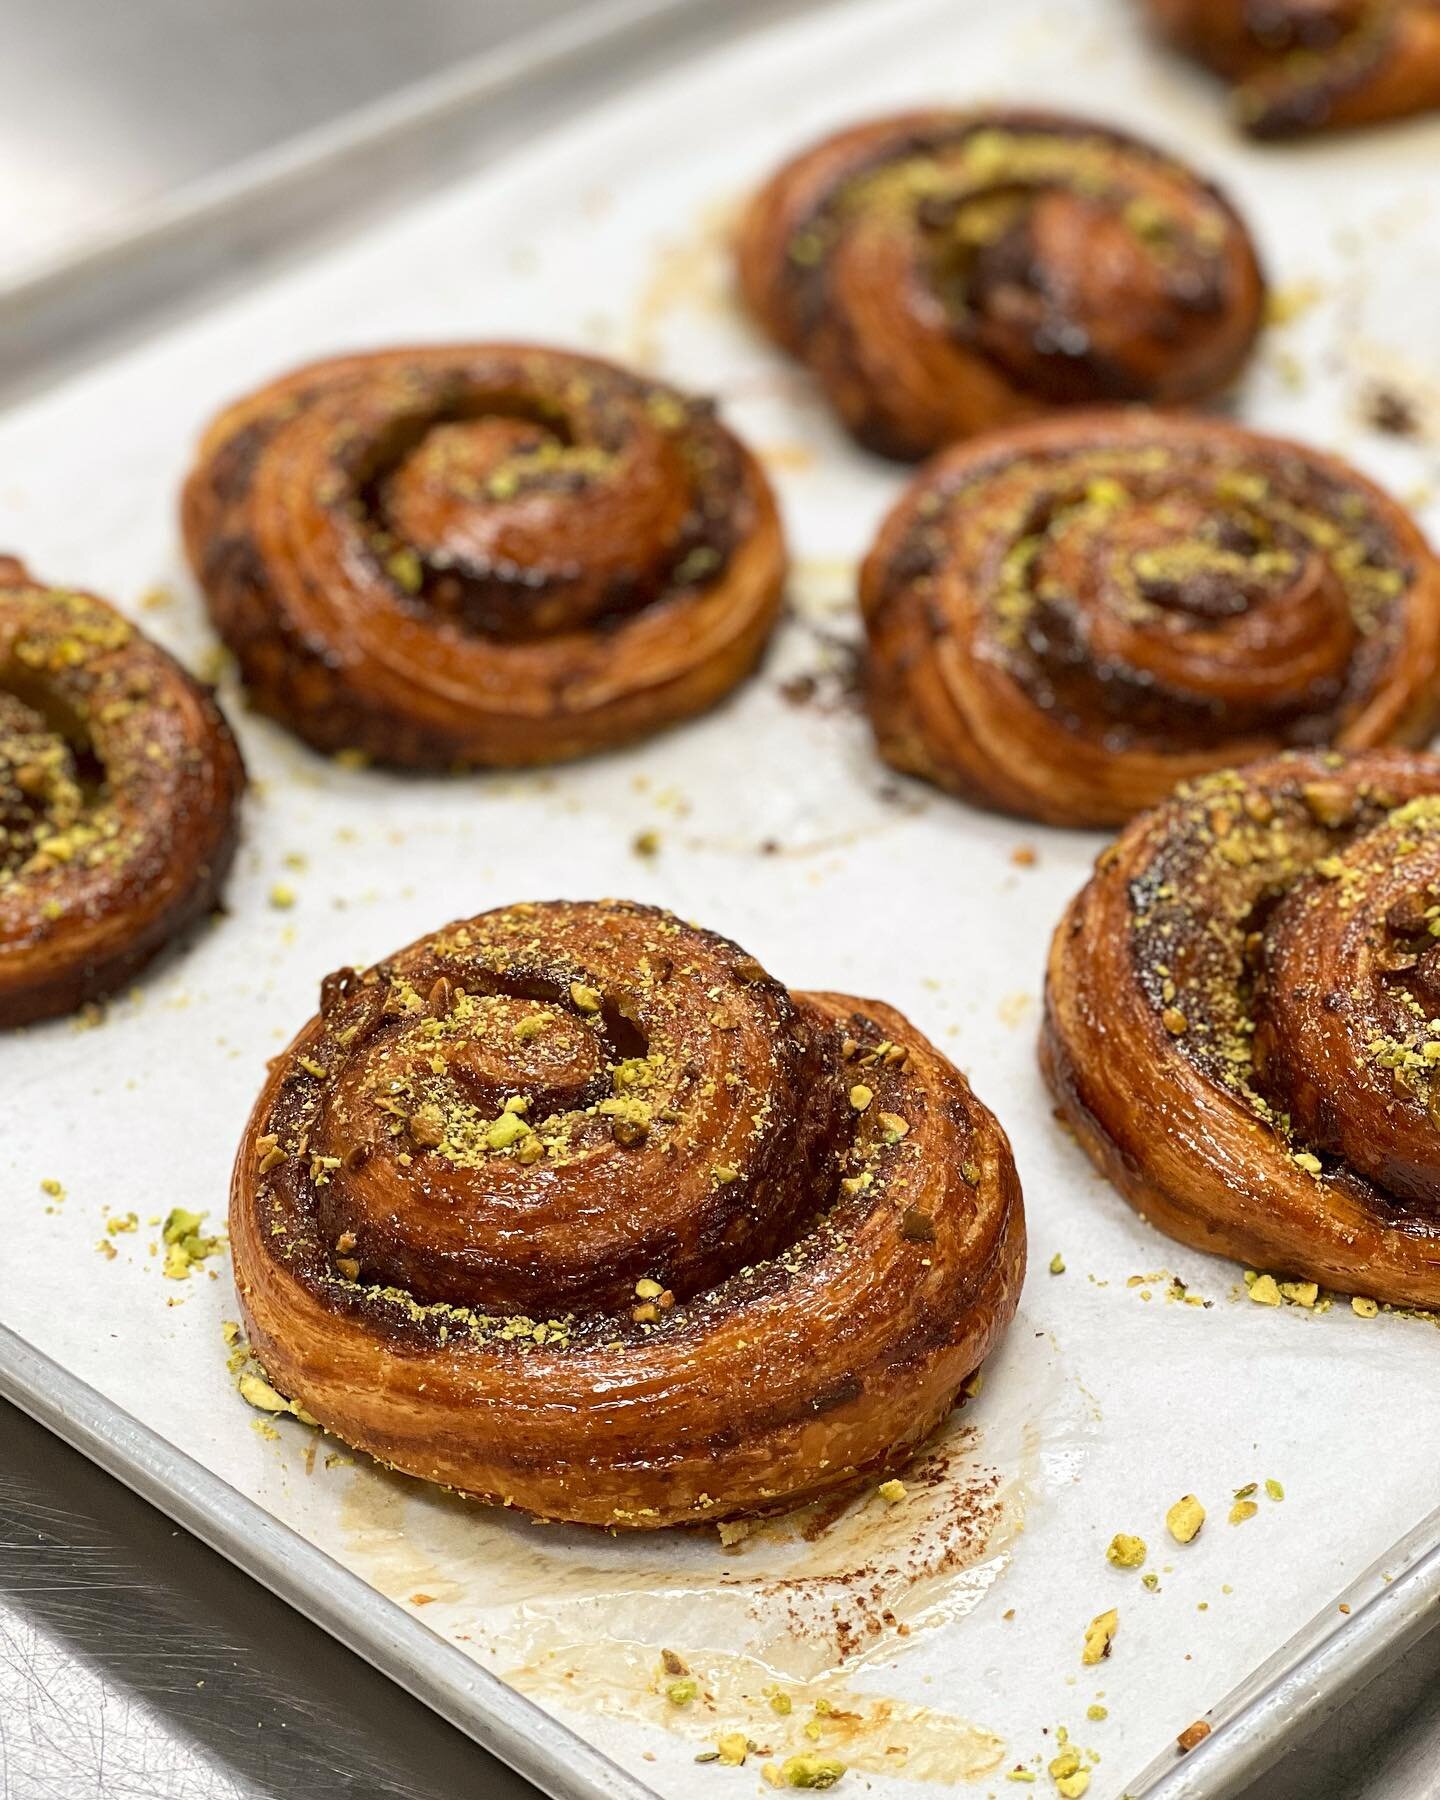 New Item Alert! 

Pistachio Escargot: A snail-shaped Viennoiserie filled with pistachio frangipan and bits of crushed pistachio. Finished with a vanilla bean syrup sheen. 

Available now through preorders. Link in bio ☝🏼

#popupbakery #viennoiseries